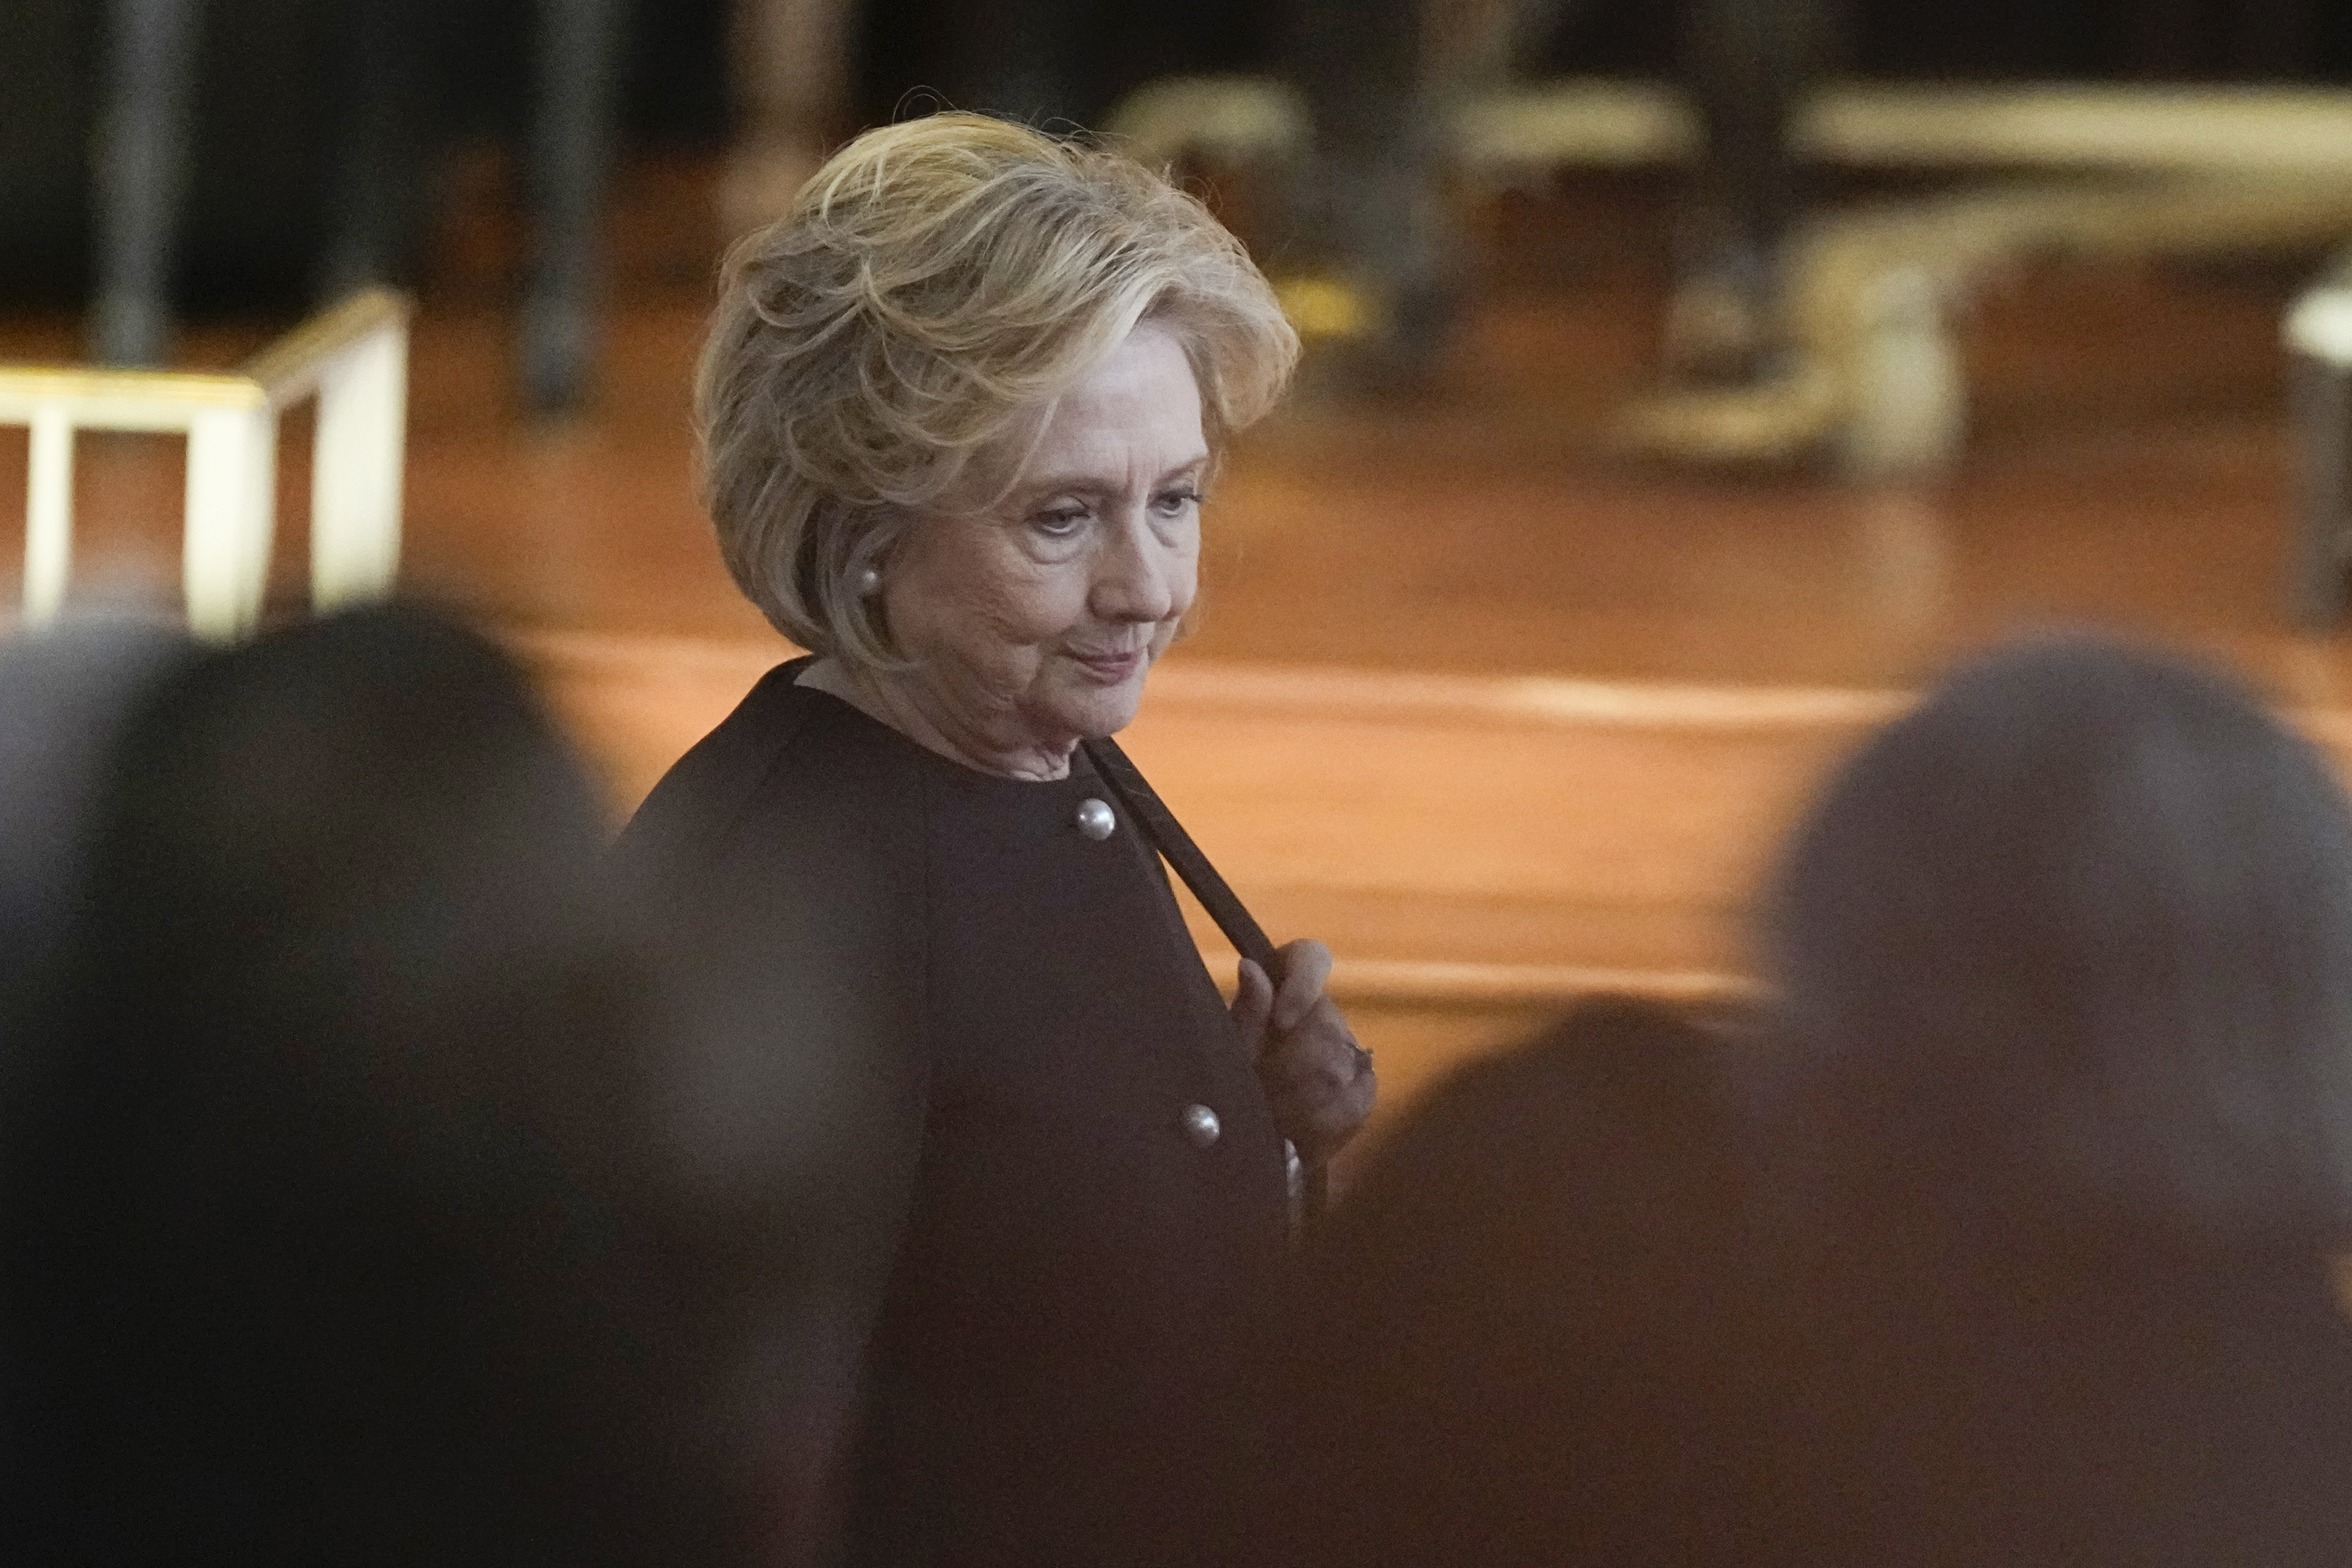 Former U.S. First Lady Hillary Clinton at former U.S First Lady Rosalynn Carter's tribute service in Atlanta, Georgia on November 28, 2023 | Source: Getty Images